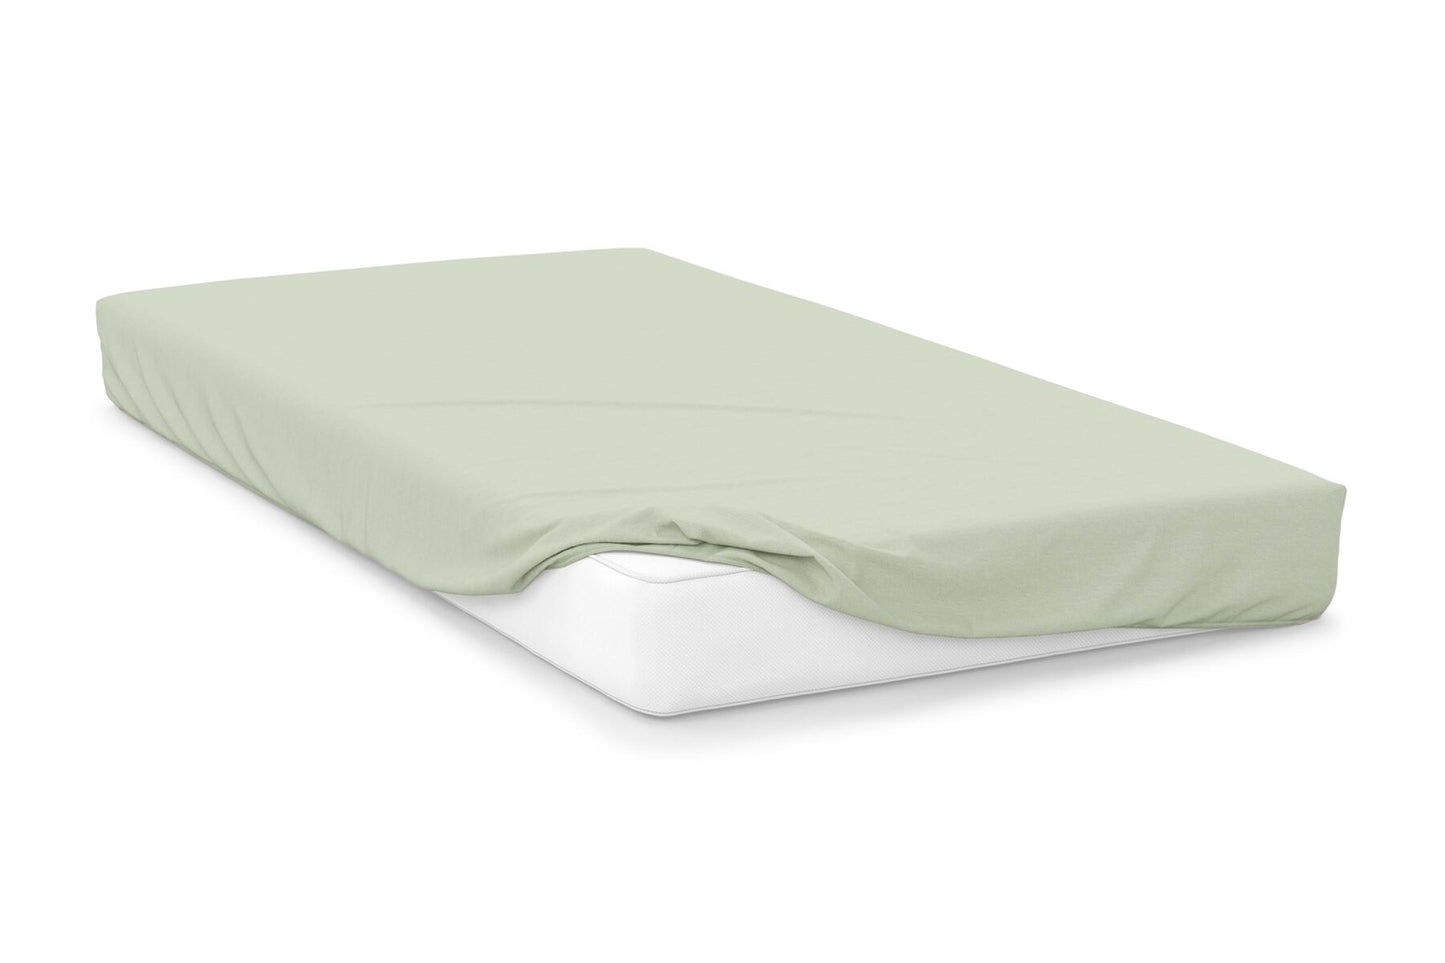 Belledorm-Fitted Sheets-Luxury Percale-200 Thread Count-Apple